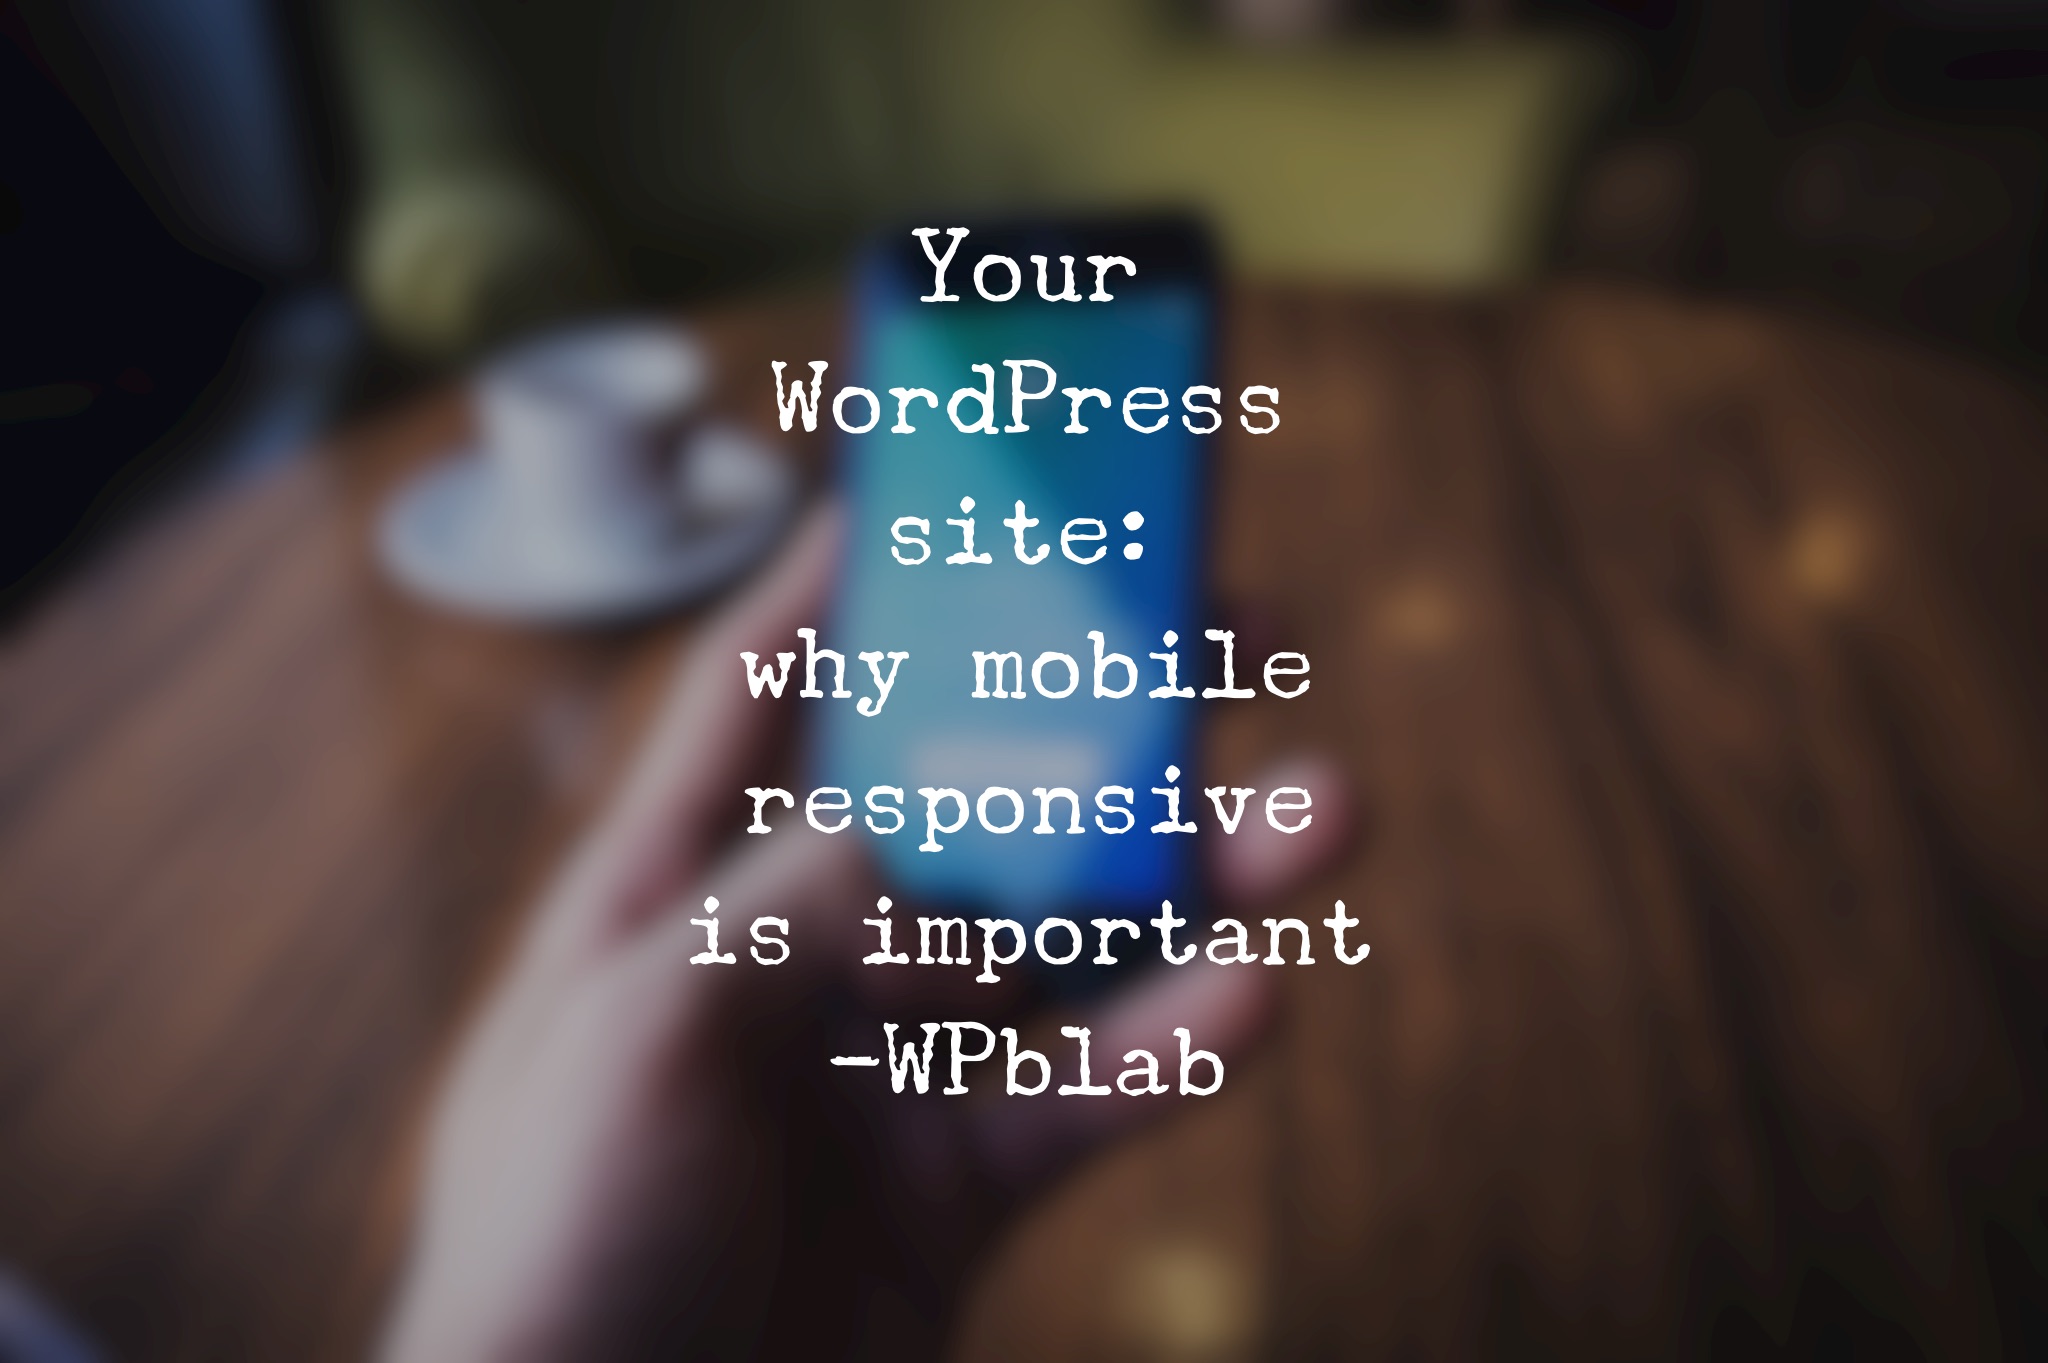 EP41 - Your #WordPress Site Why Mobile Responsive Is Important - WPblab 1